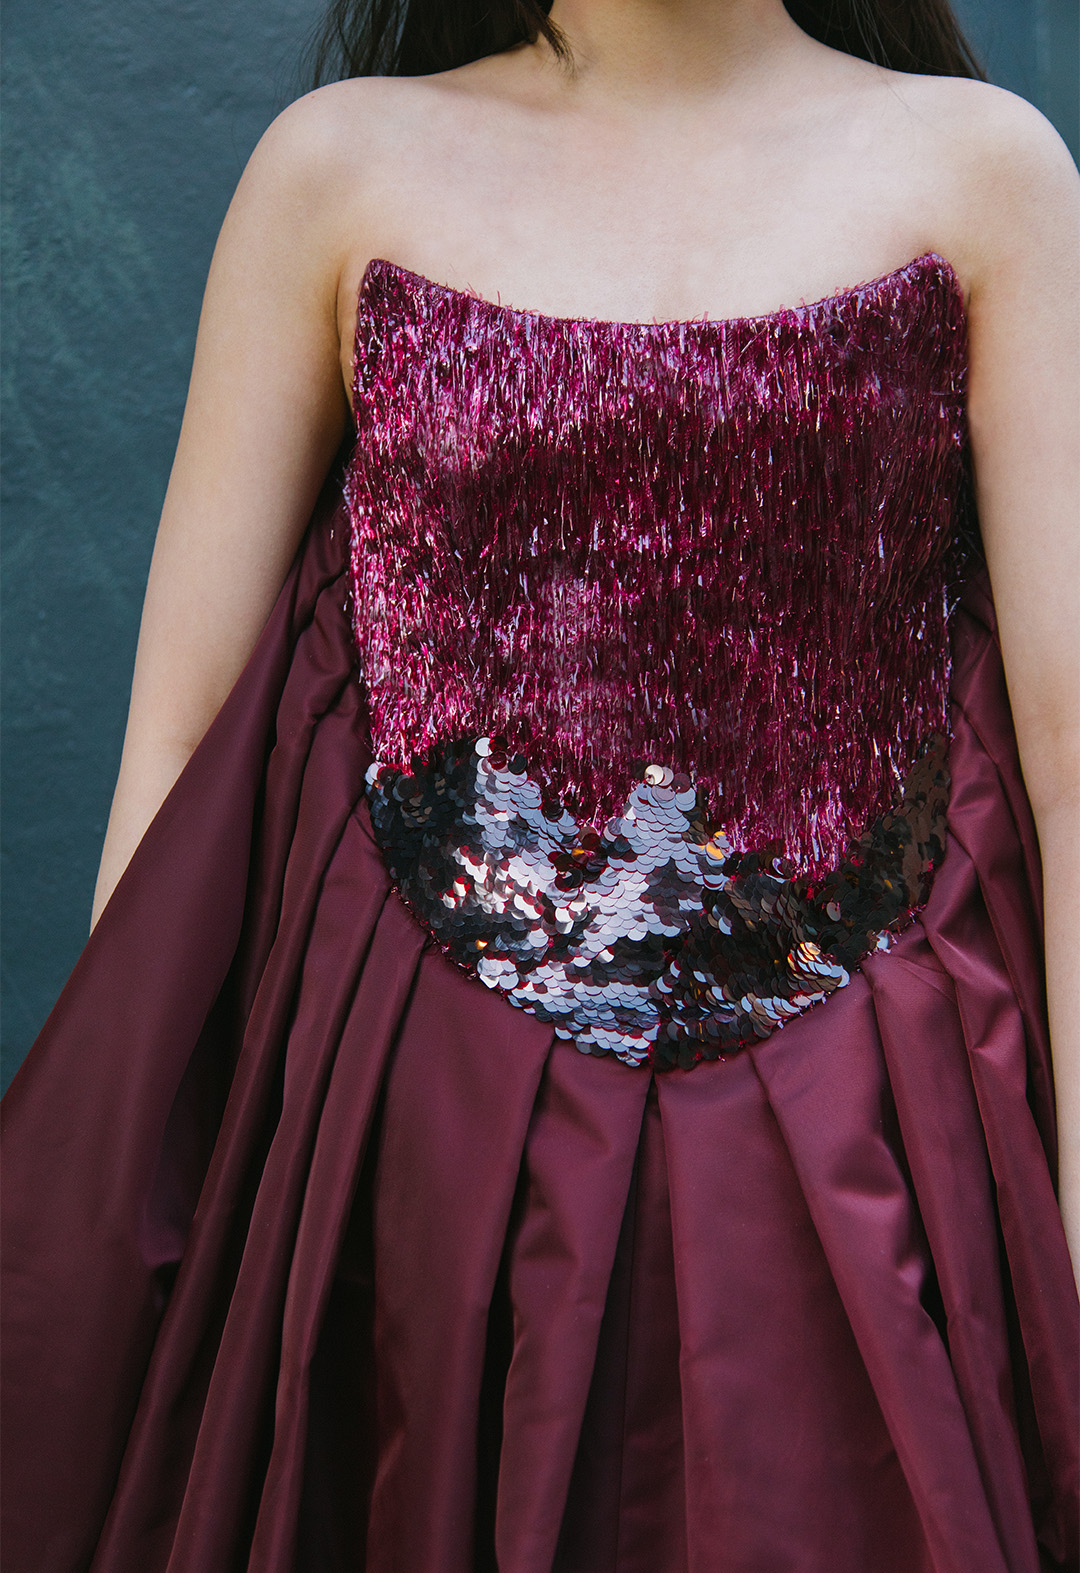 Close-up view showing the bodice detail. 